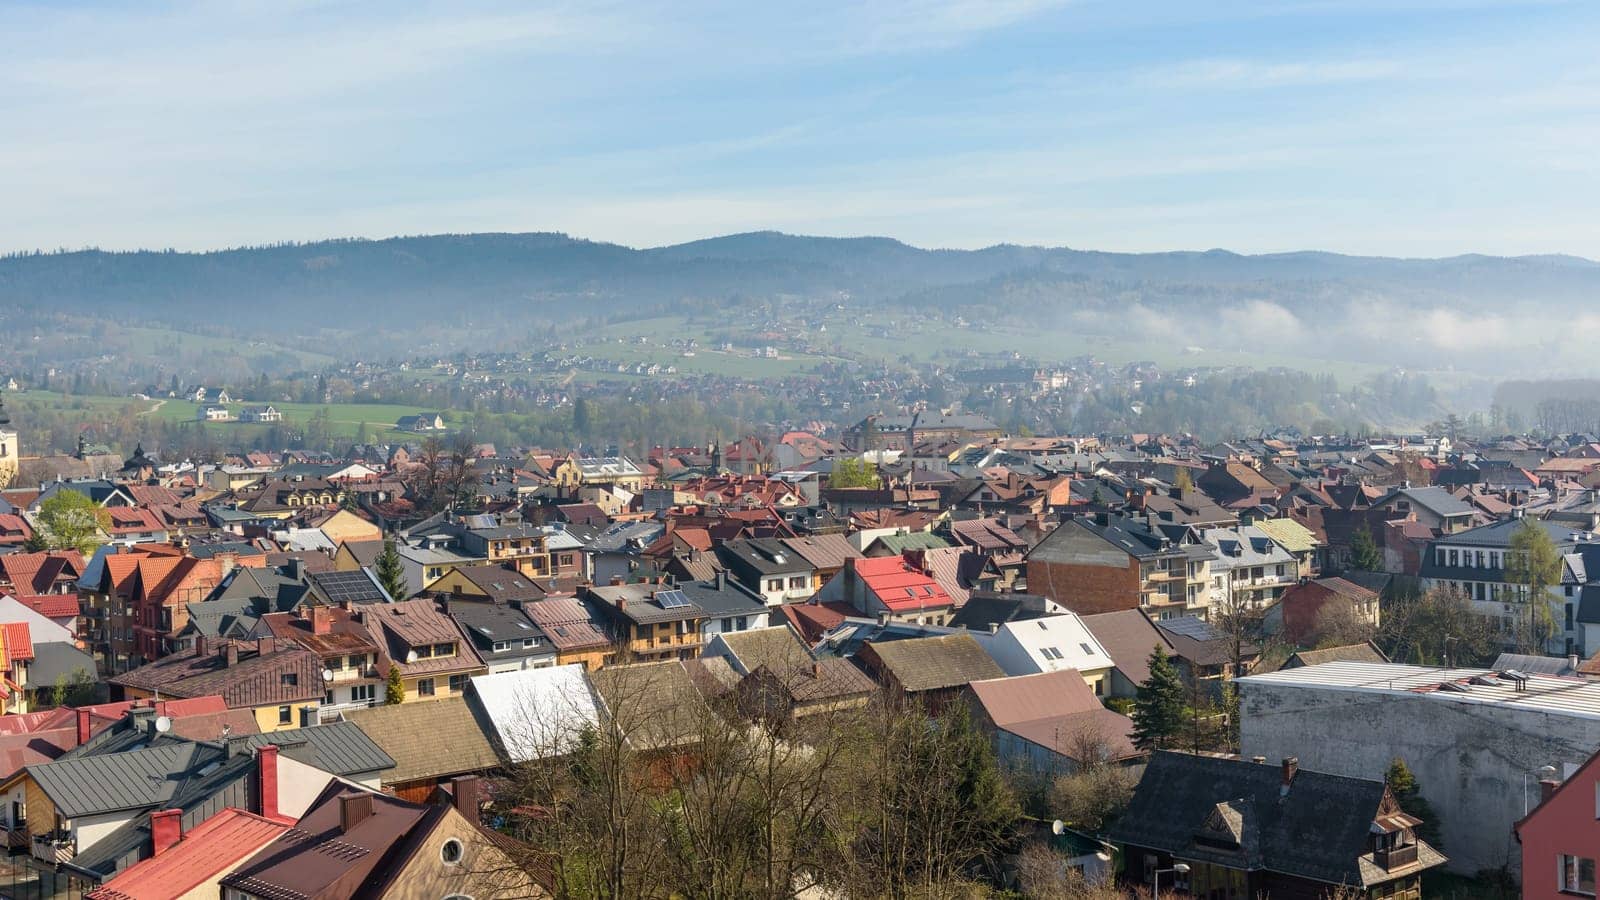 Panoramic view of the rooftops of Nowy Targ with the morning fog in the background